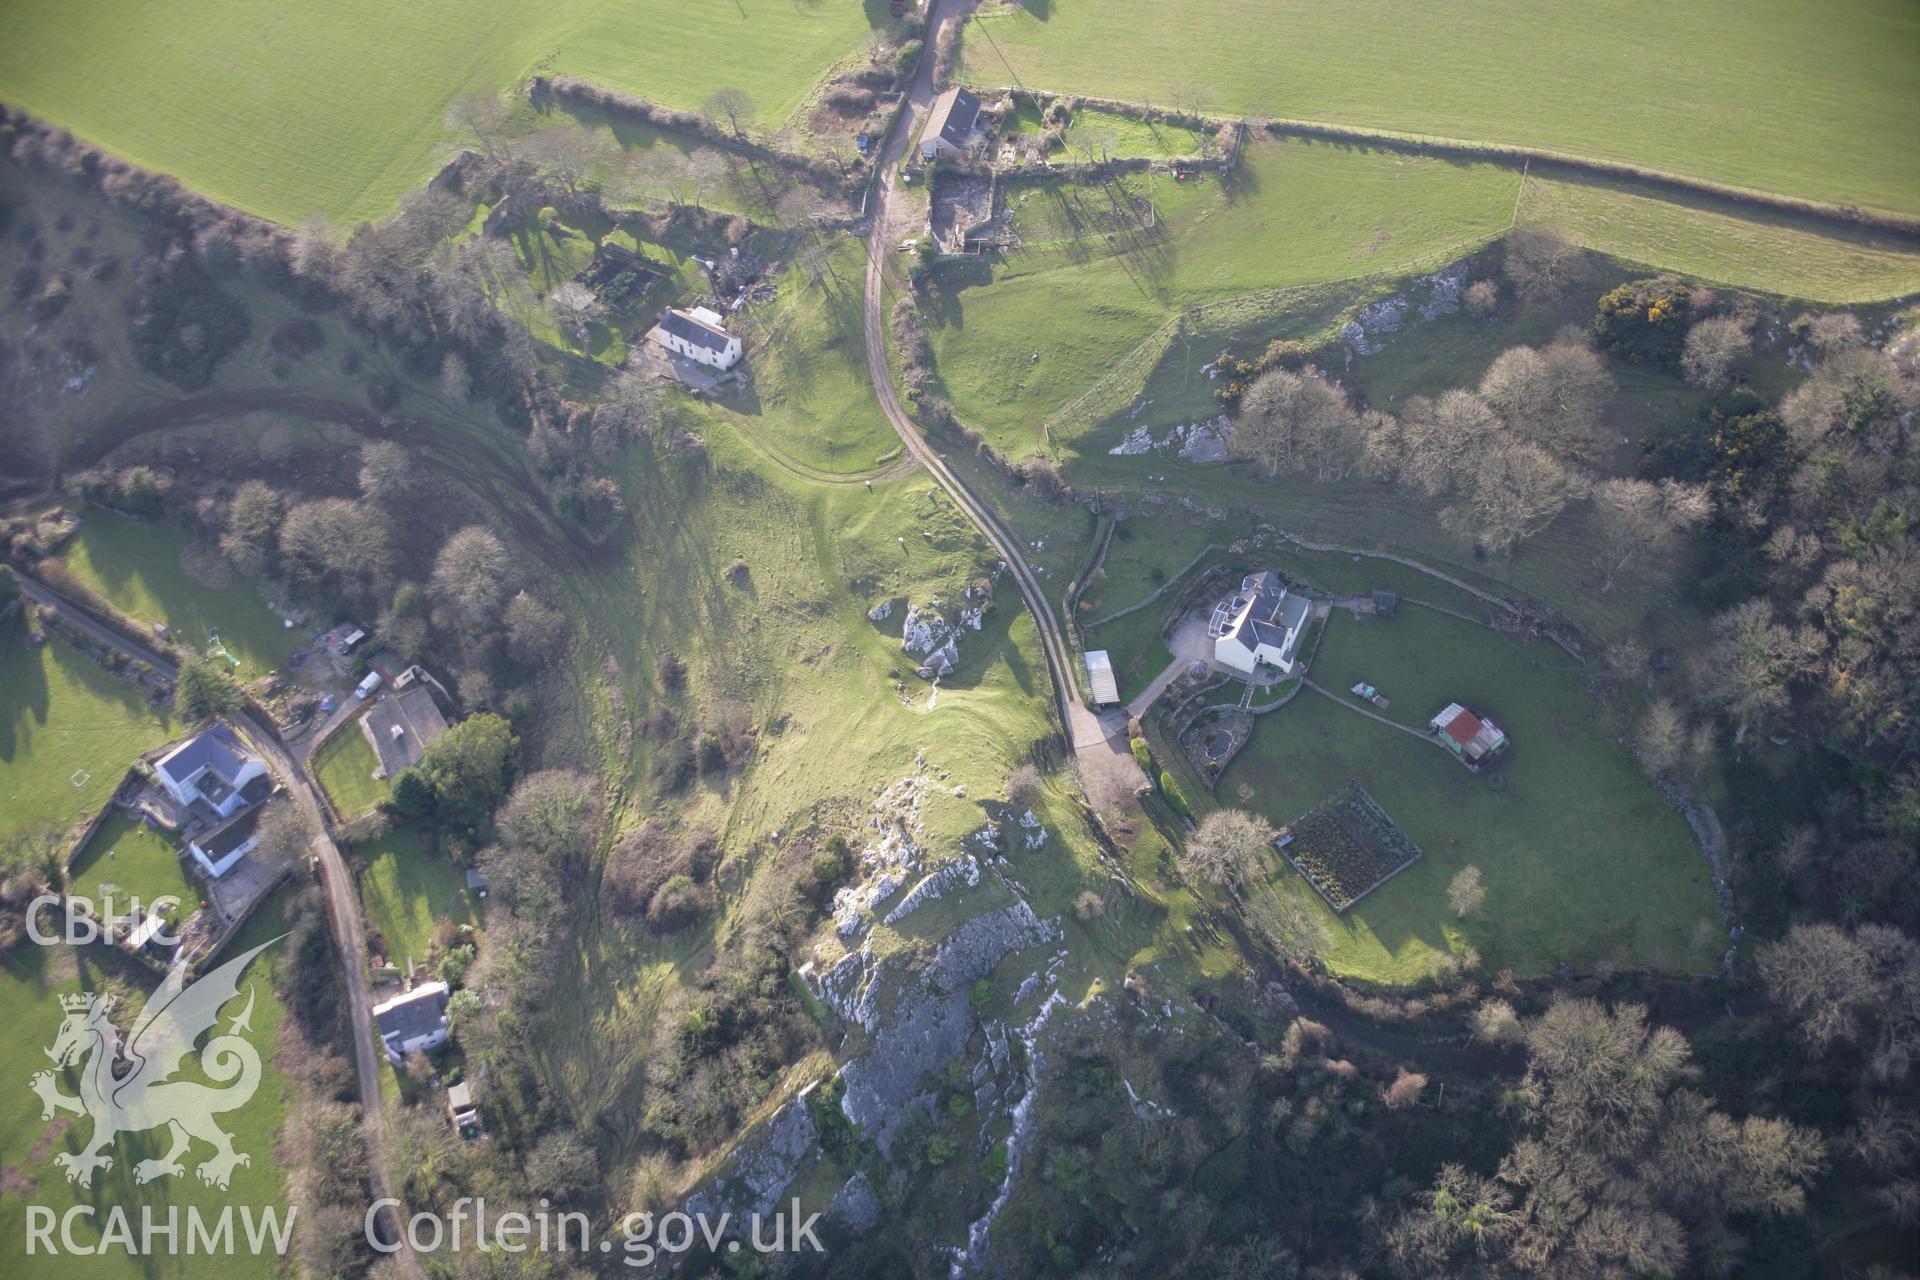 RCAHMW colour oblique aerial photograph of Landimor Castle (Bovehill Castle), and earthworks of shrunken settlement, viewed from the north-east. Taken on 26 January 2006 by Toby Driver